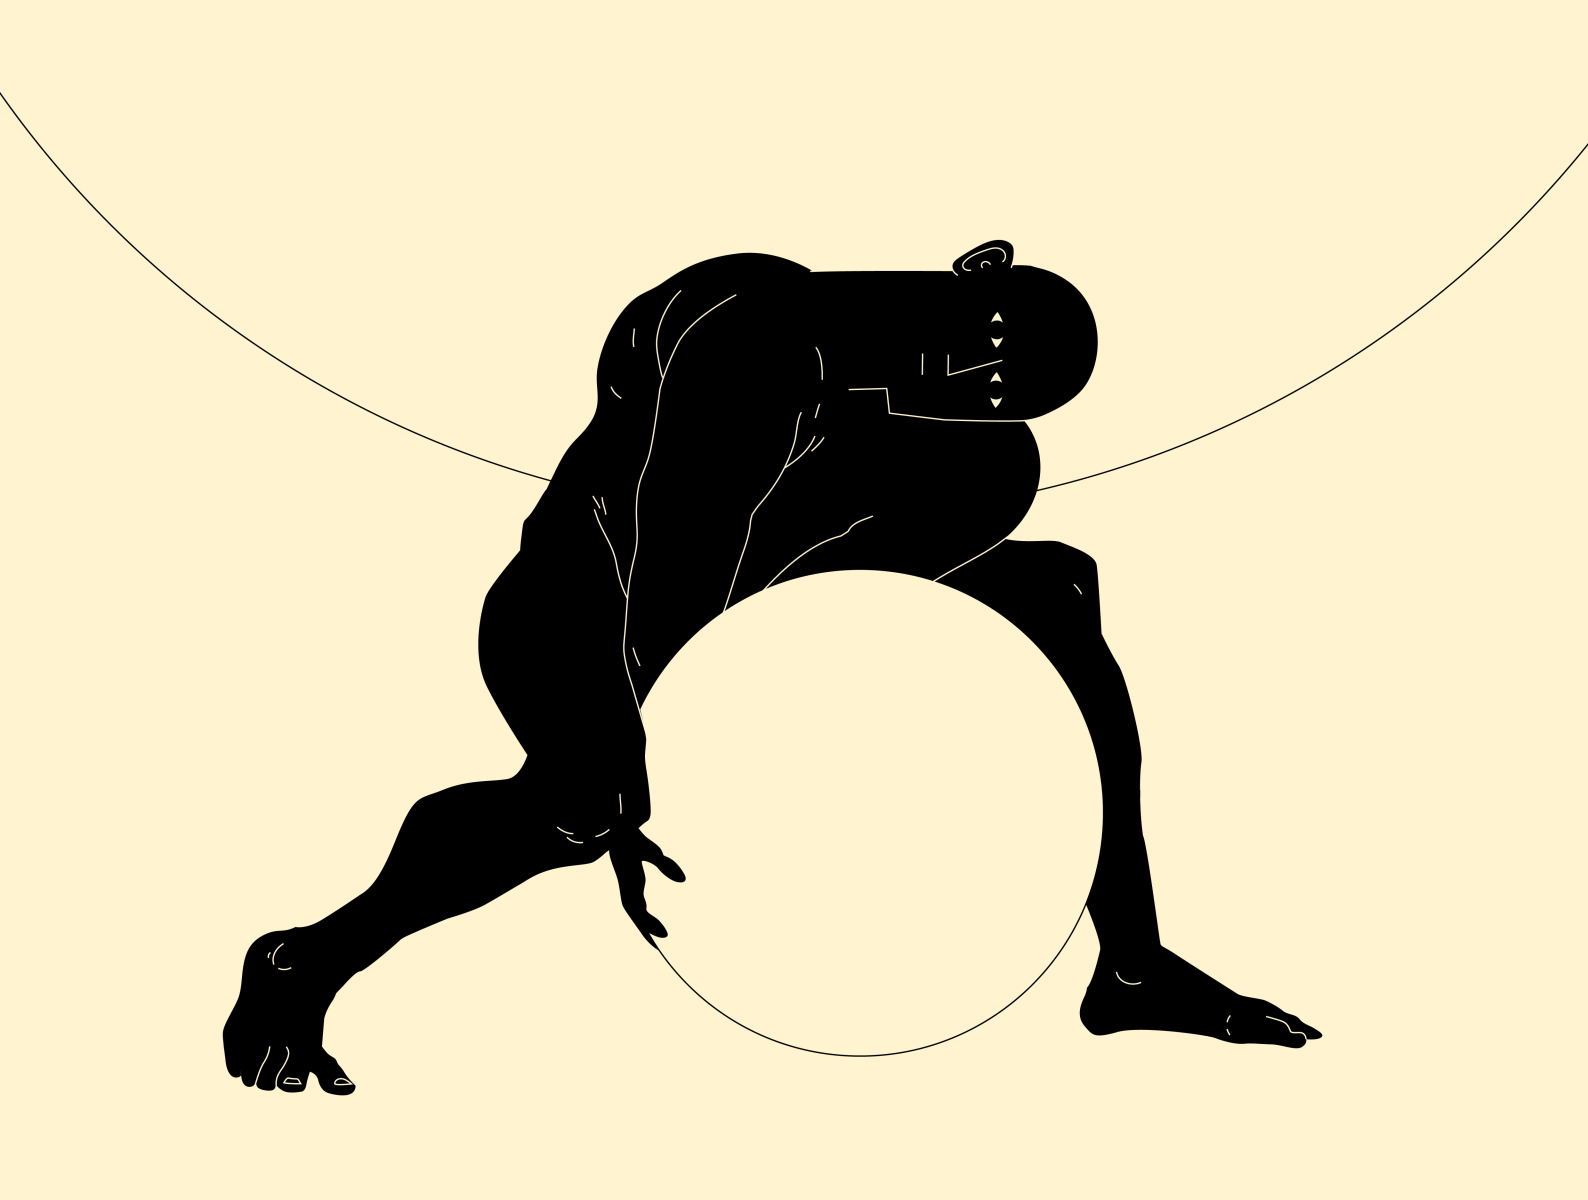 Sisyphus abstract composition conceptual illustration dual meaning figure figure illustration illustration laconic lines man minimal poster poster a day push sisyphus stone